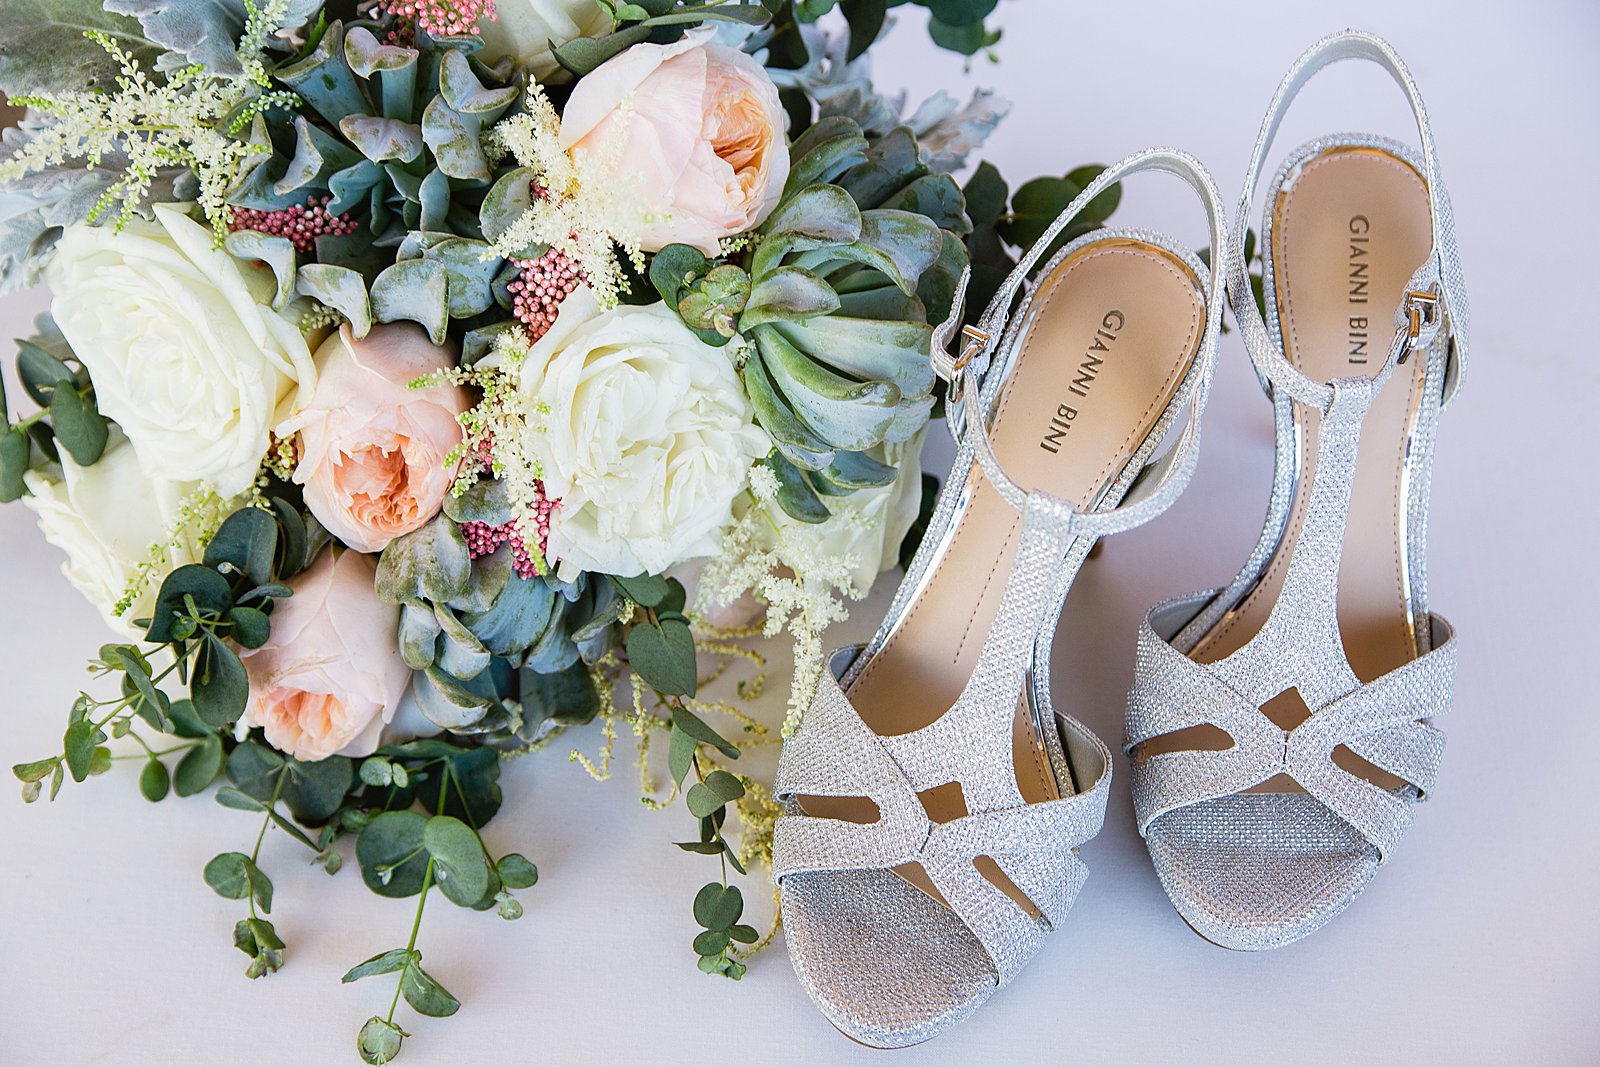 Brides's wedding day details of silver Gianni Bini shoes with green and blush bouquet. by PMA Photography.